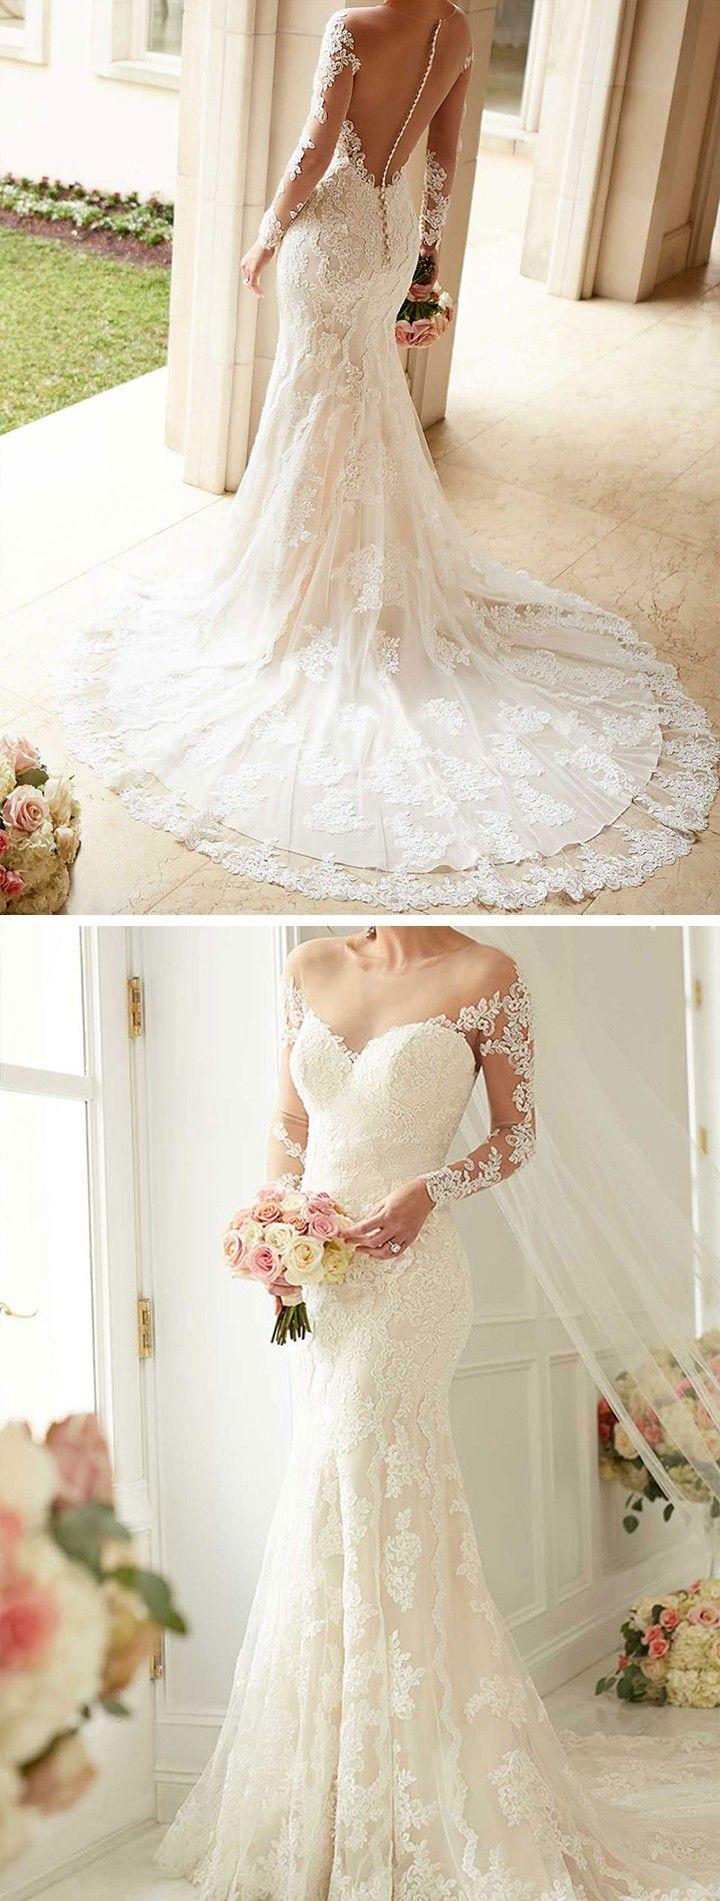 Wedding - Wedding Dresses With Illusion Lace Sleeves